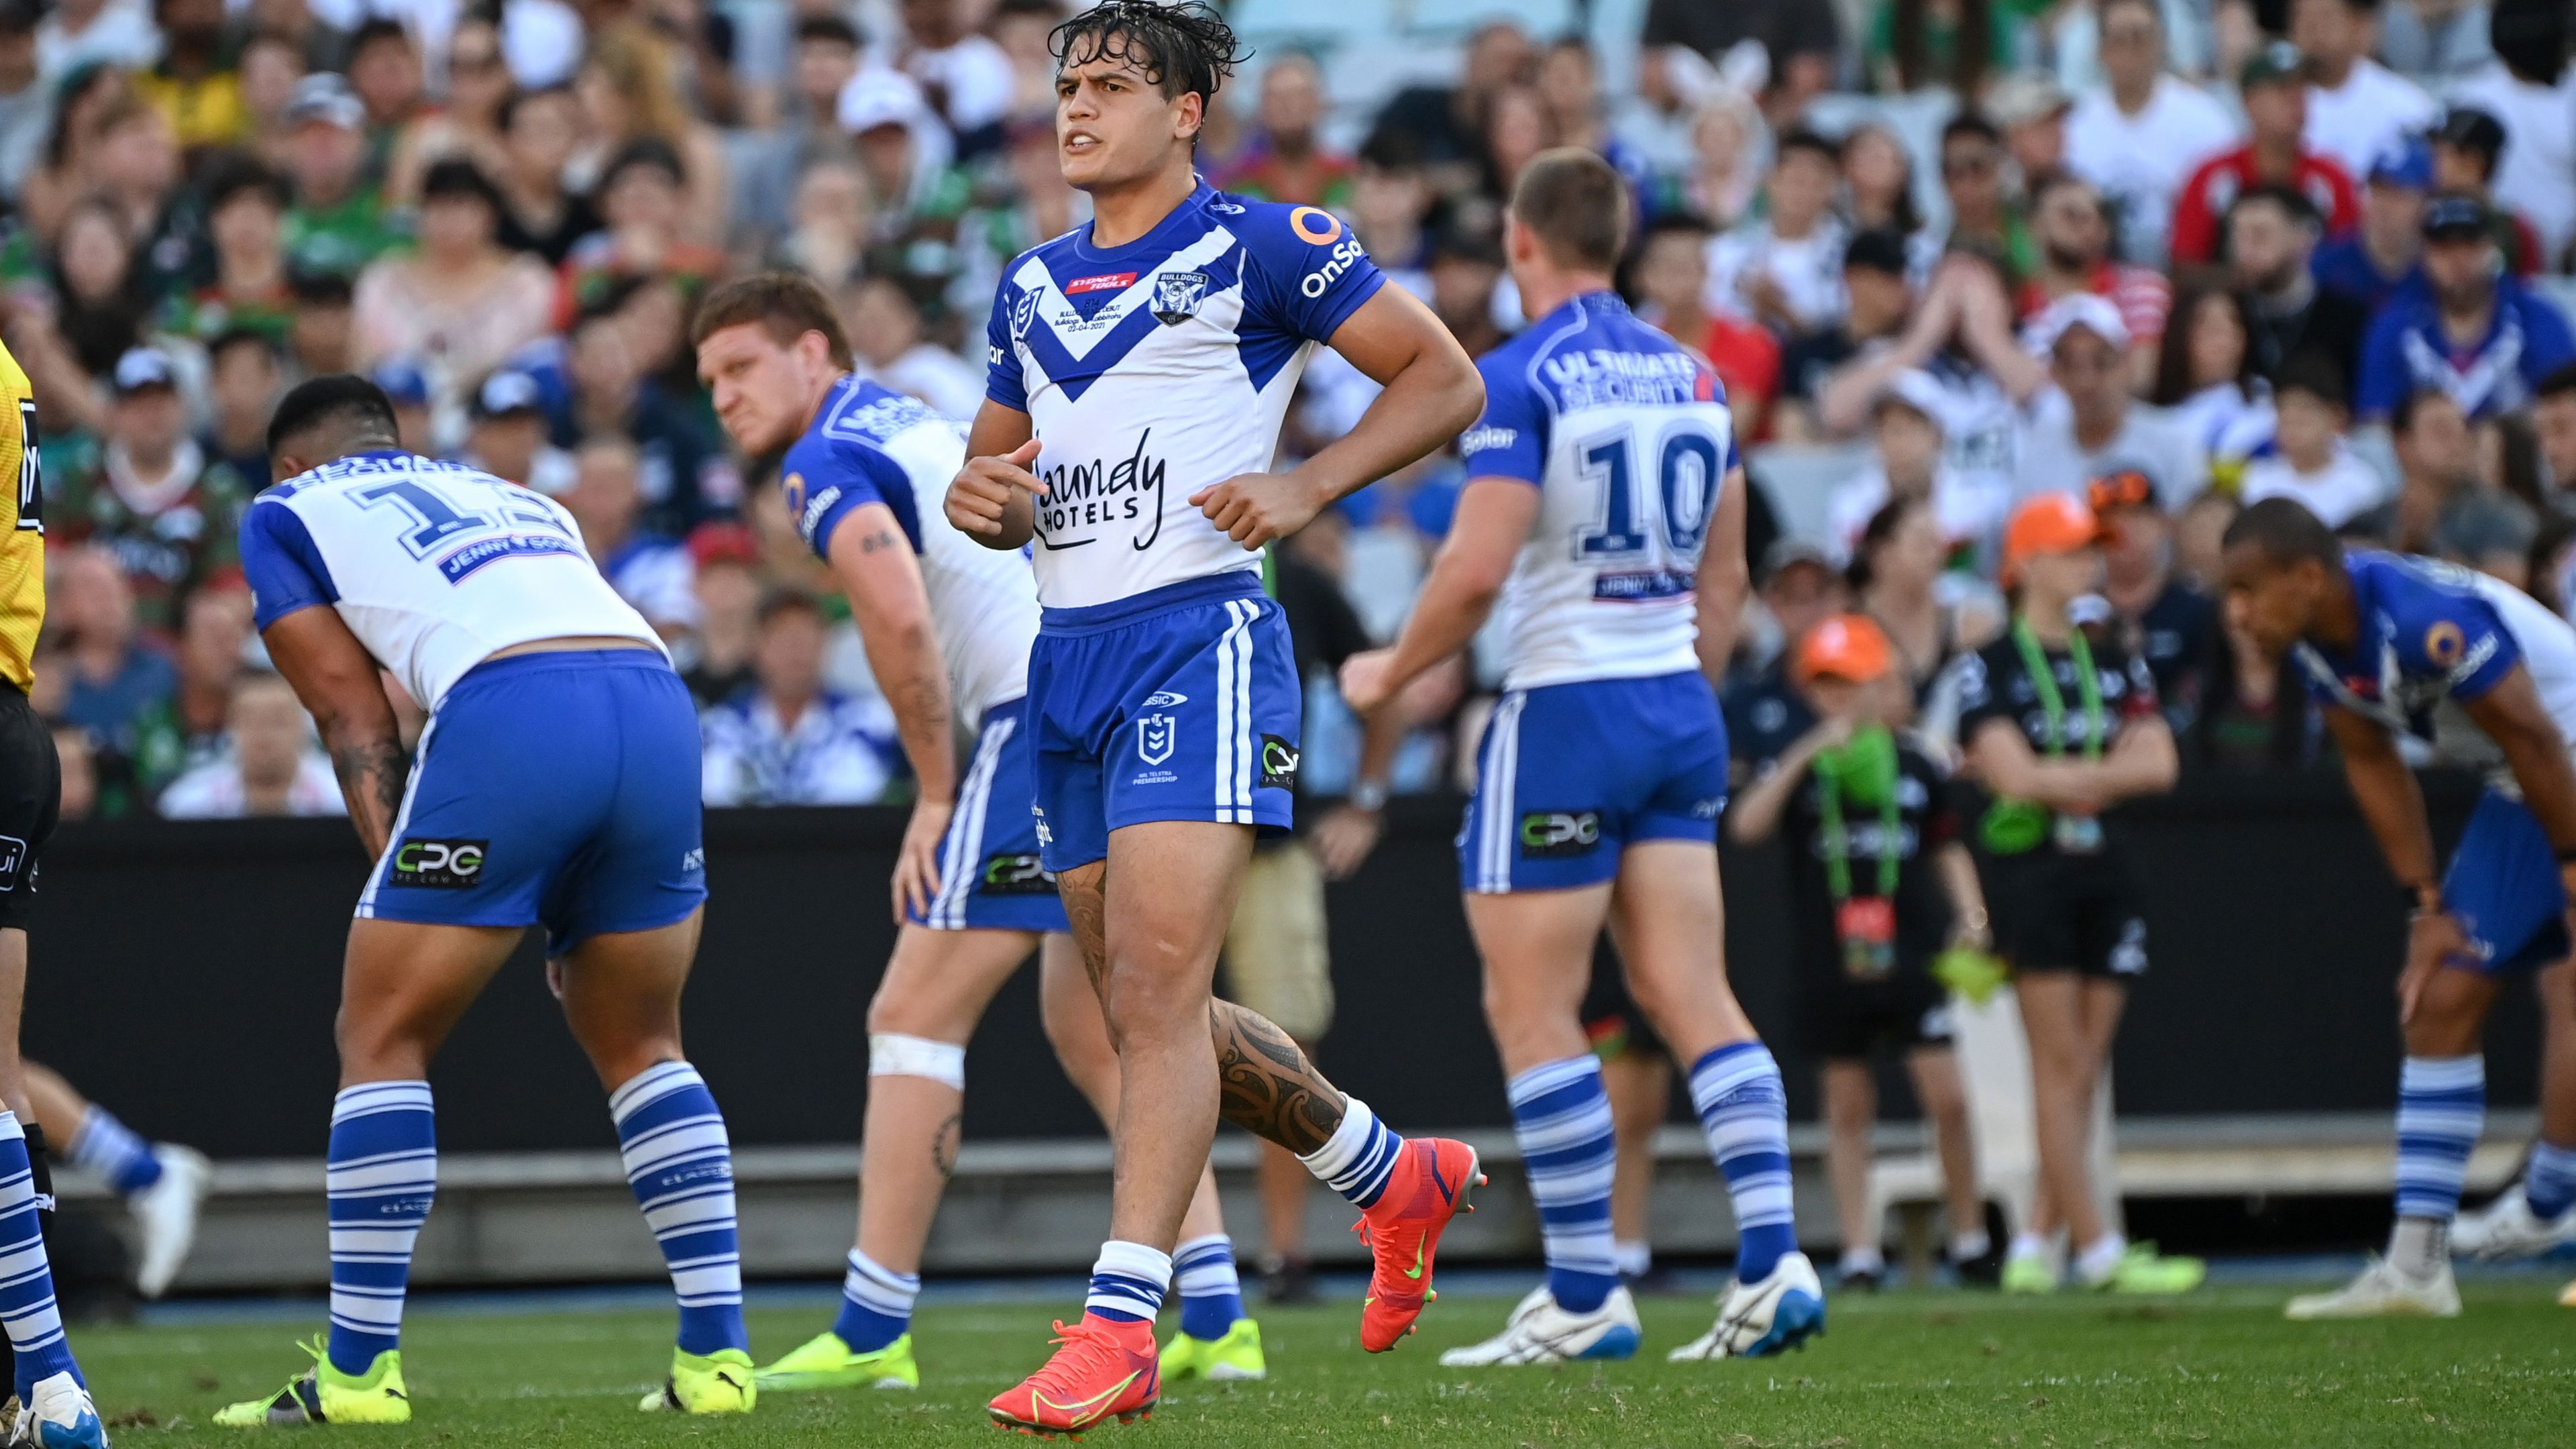 Canterbury Bulldogs fail to score again, suffer biggest-ever NRL defeat to South Sydney Rabbitohs